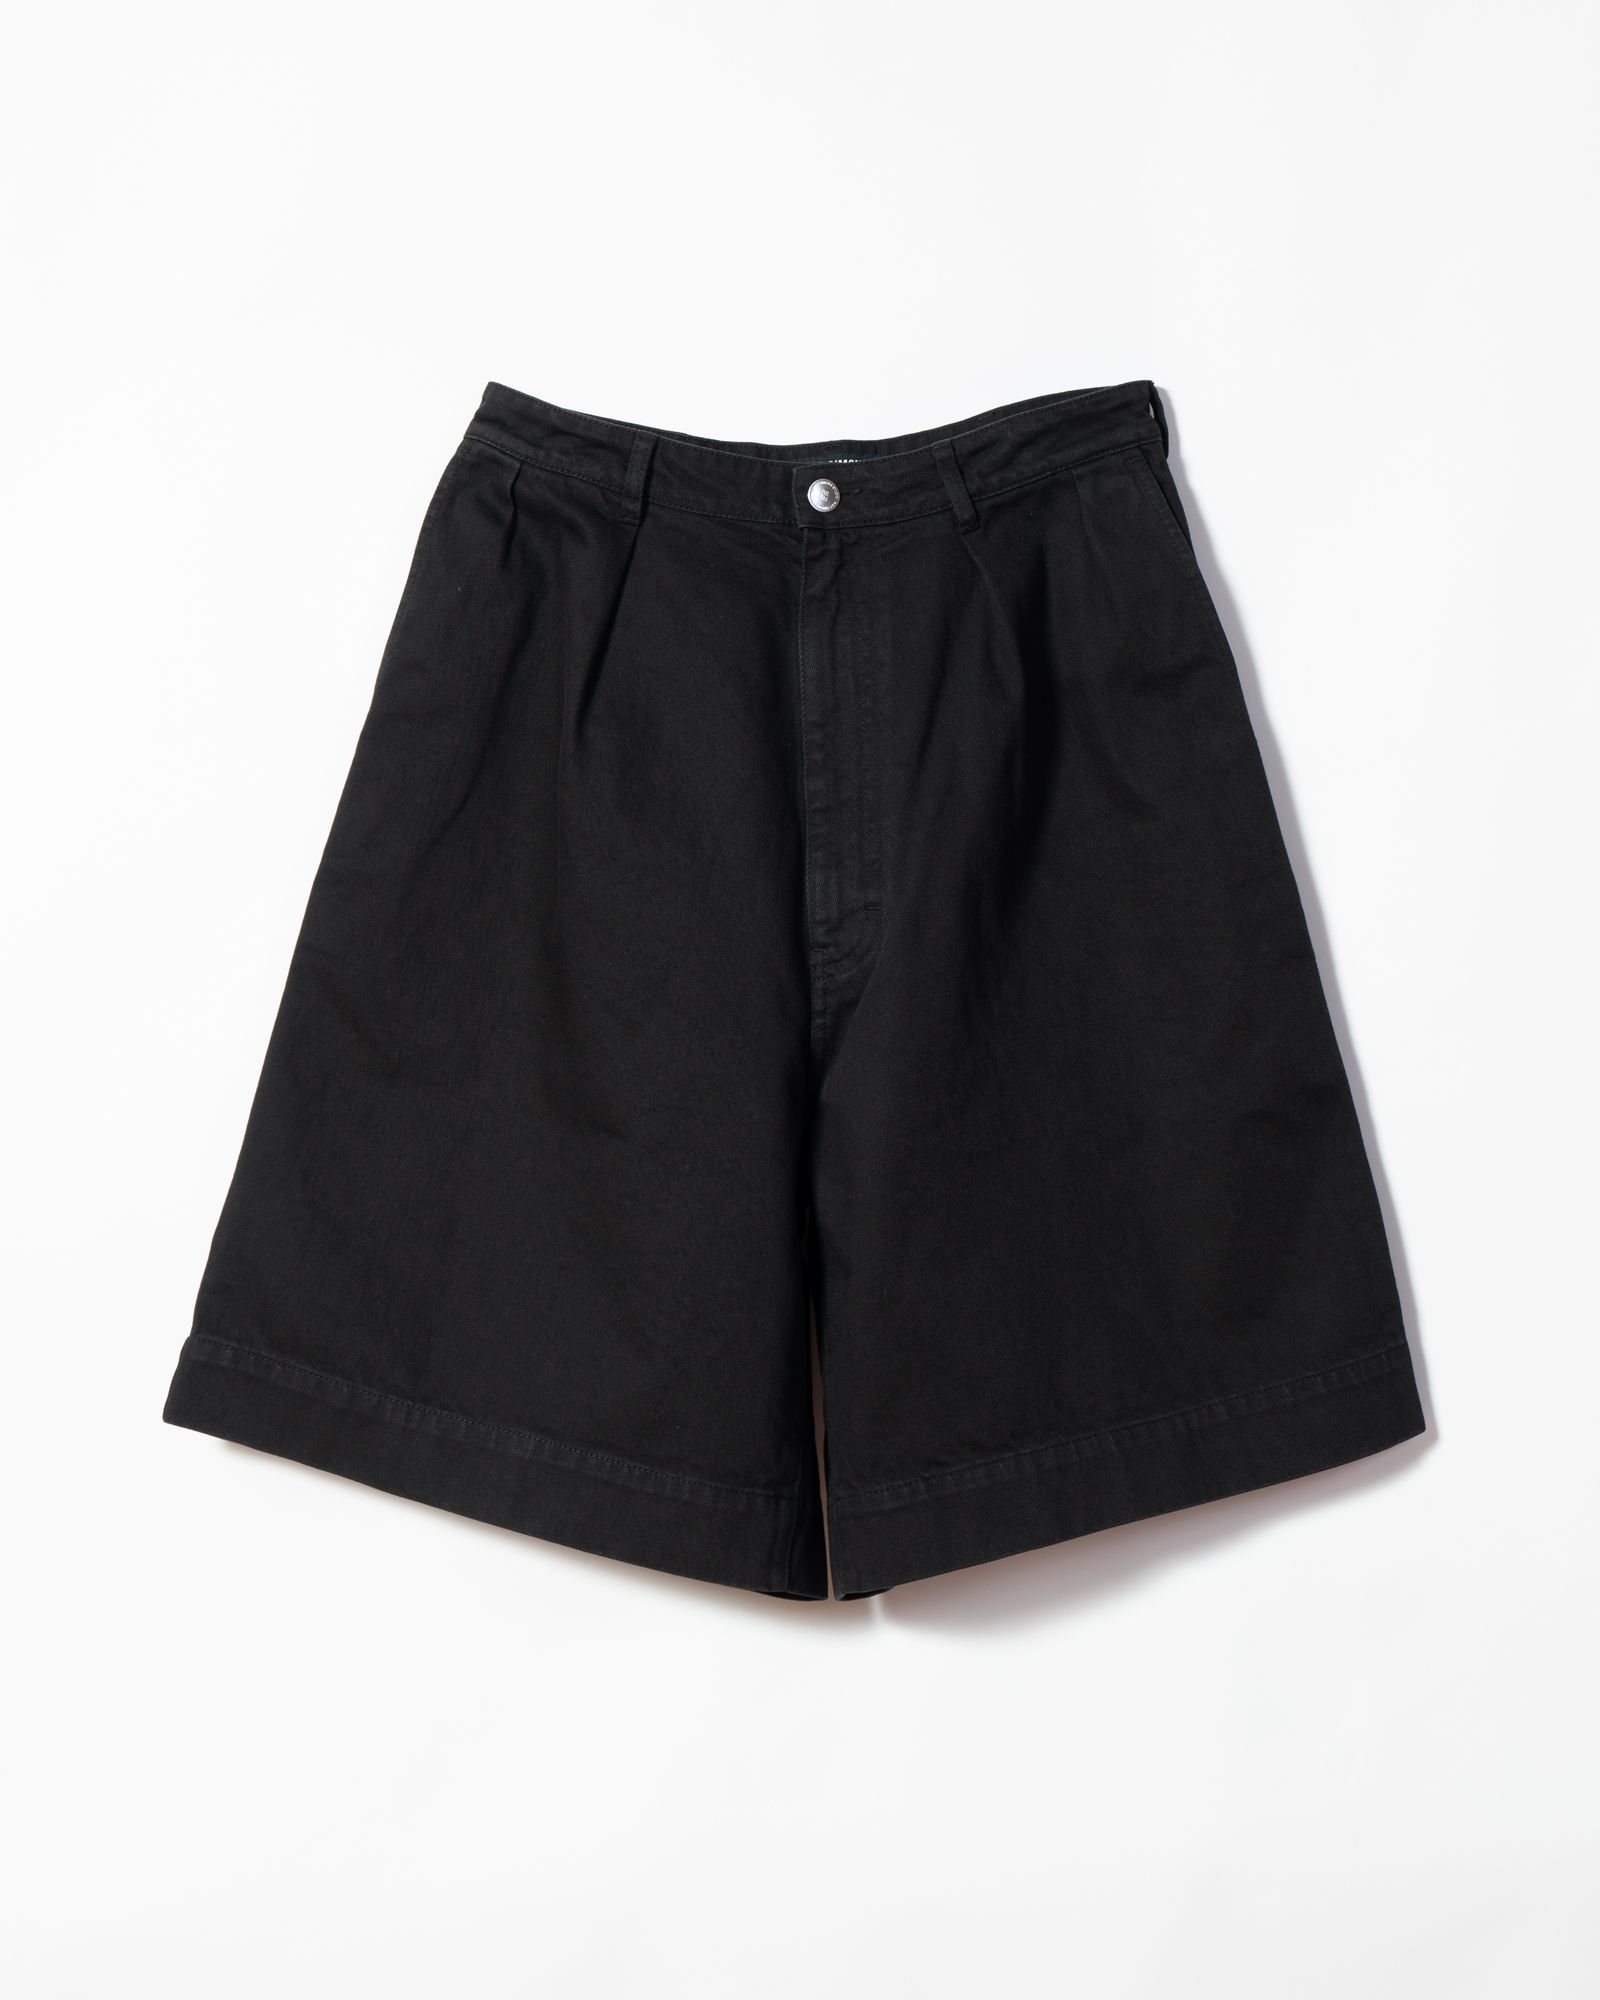 RAF SIMONS - 【ラスト1点 28】Wide denim shorts with double pleats